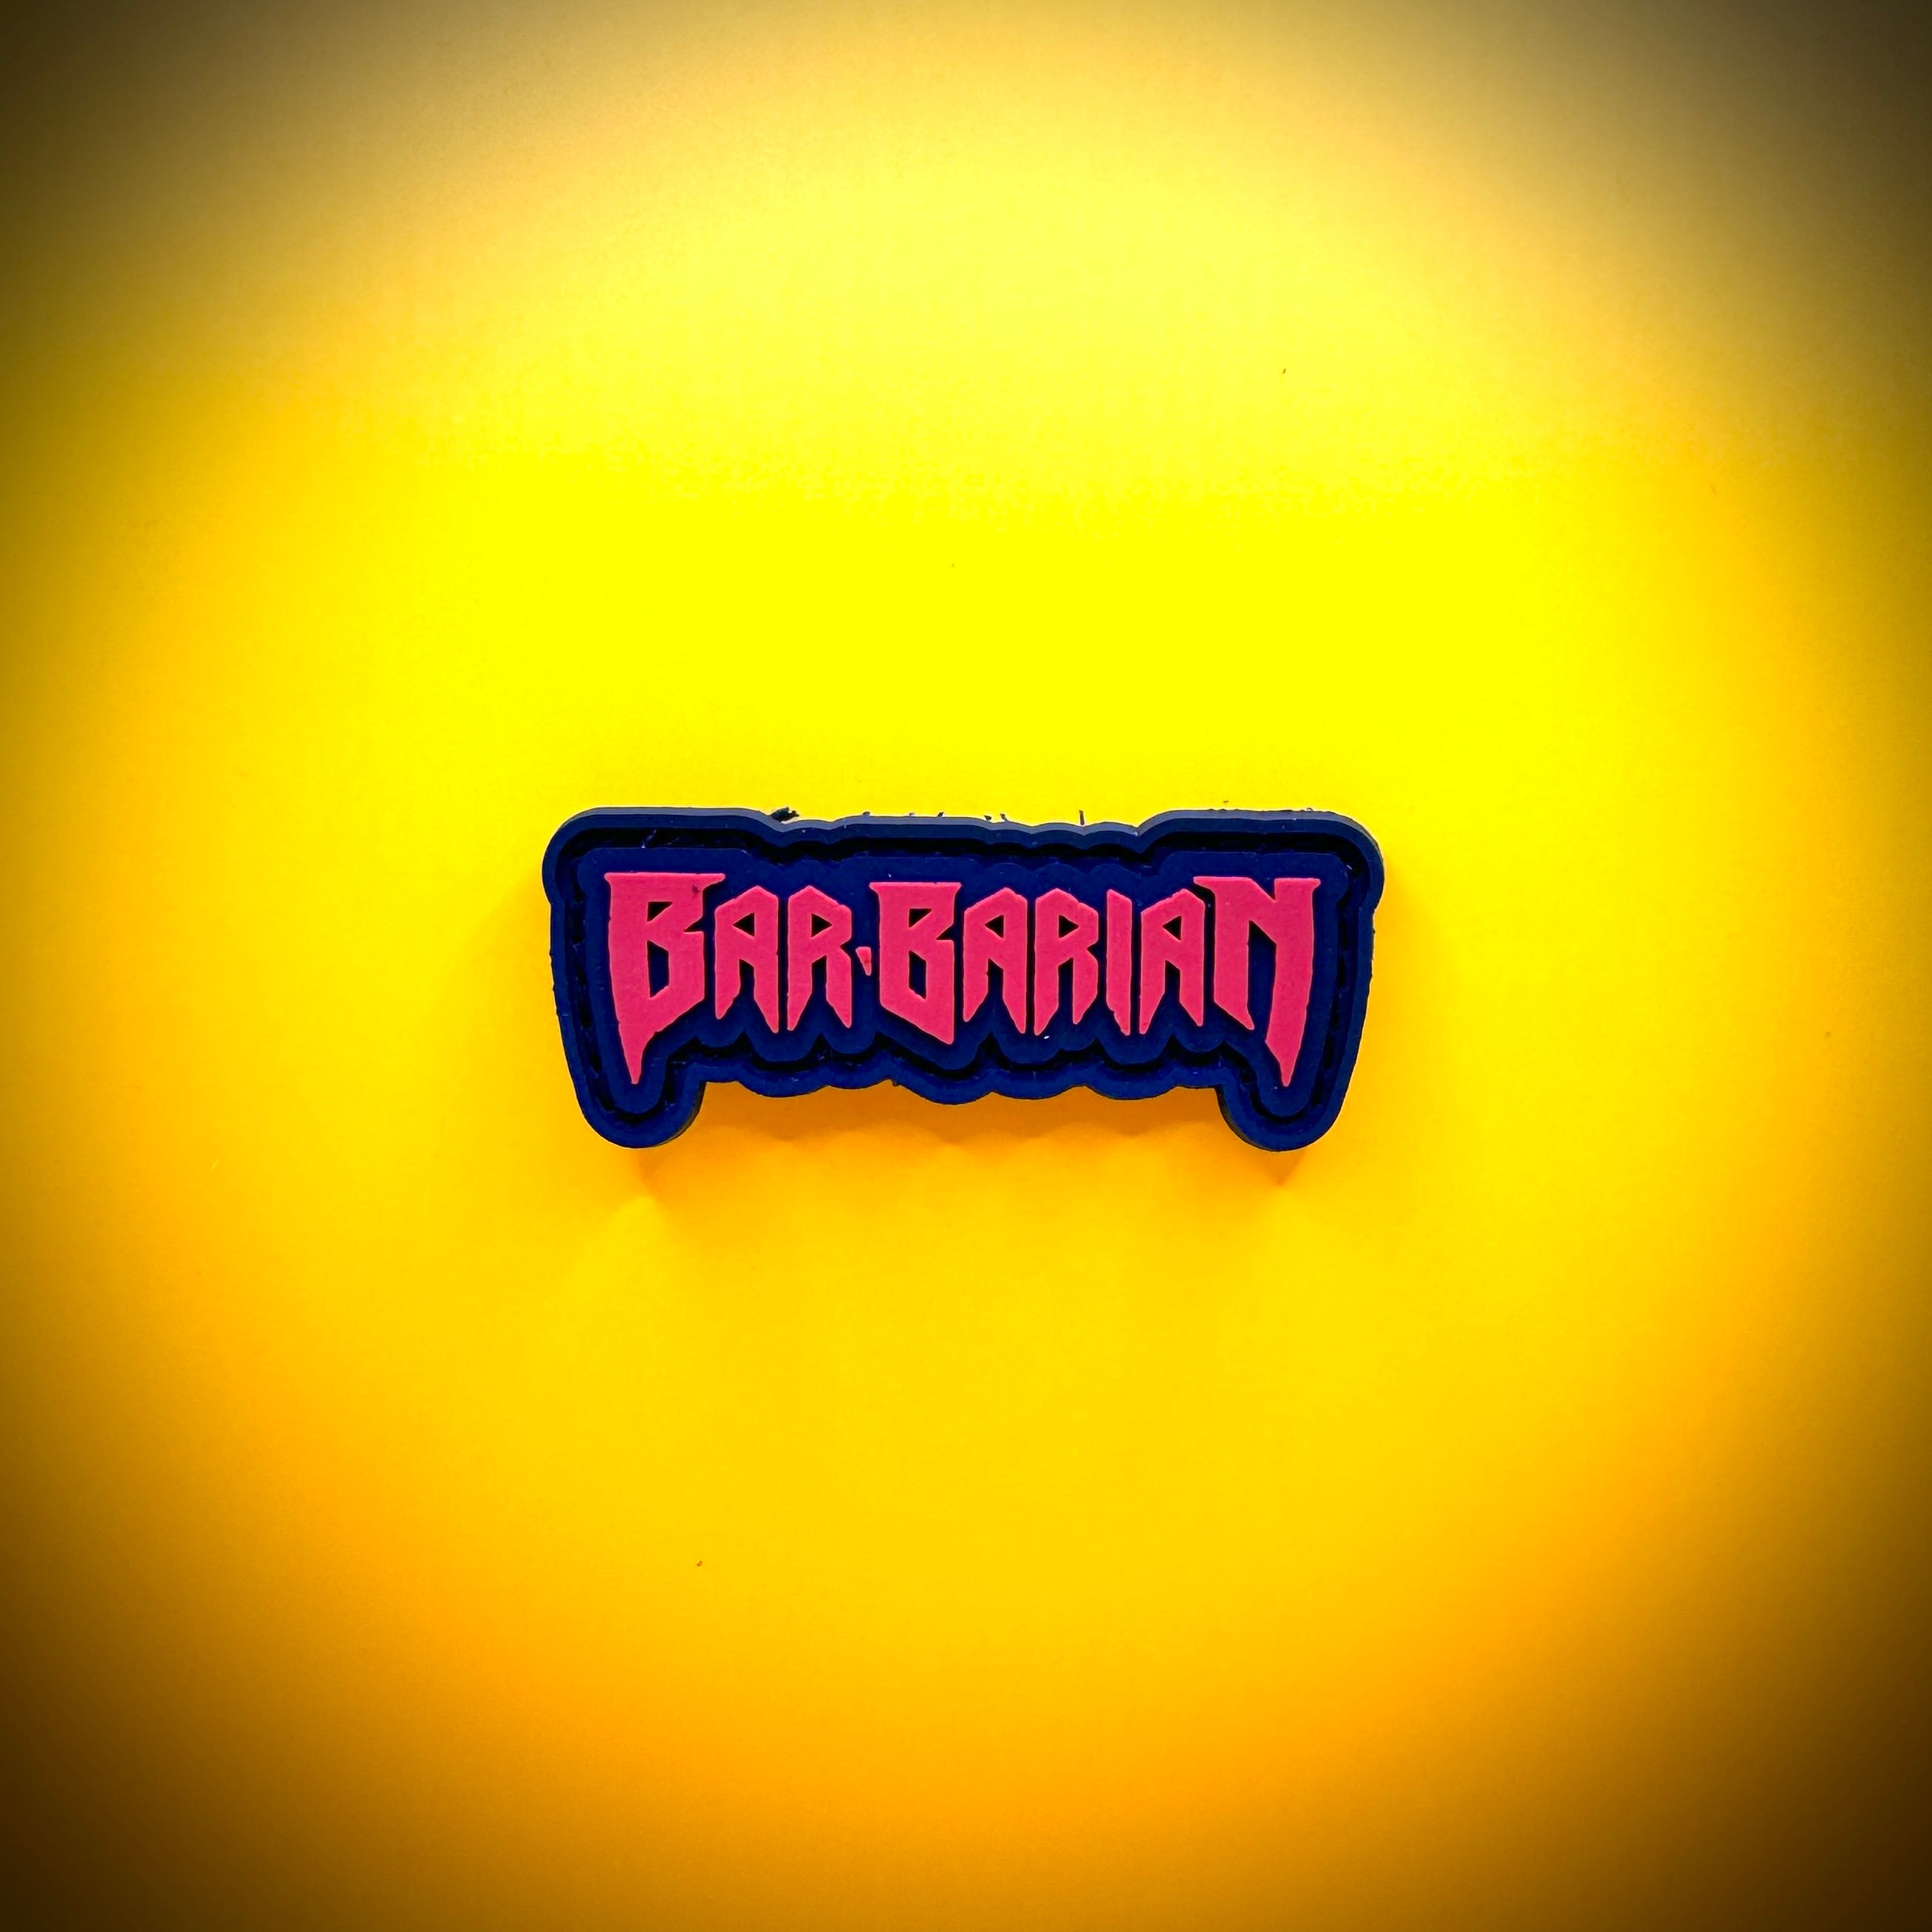 BARbarian - 3D Tactical Velcro Patch